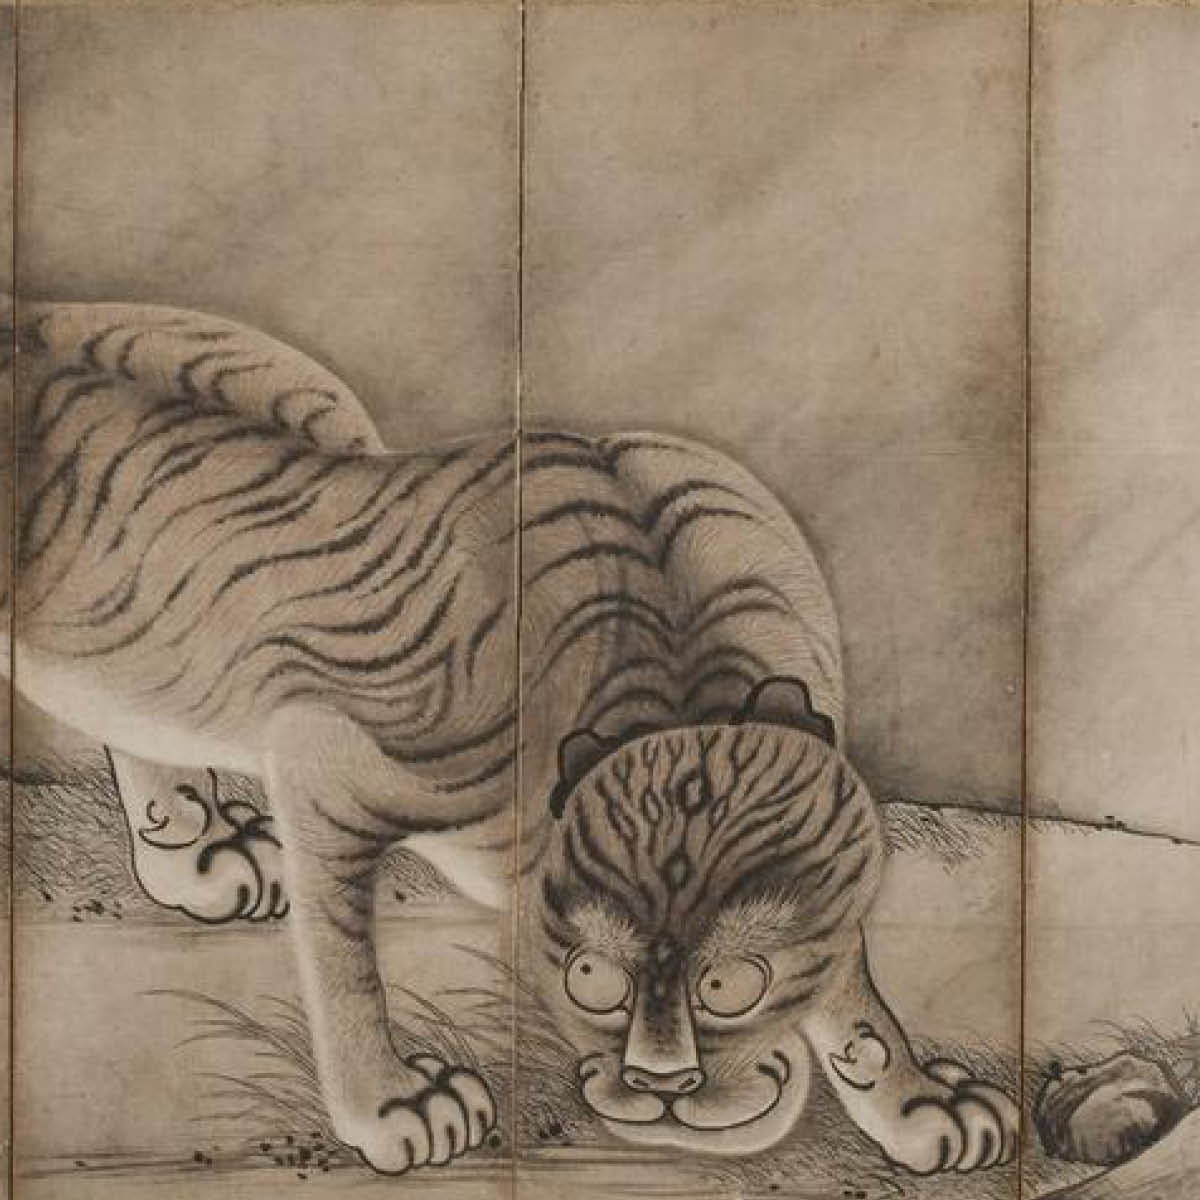 https://give.asianart.org/wp-content/uploads/sites/8/2022/04/LNYtiger.jpg 1x, https://give.asianart.org/wp-content/uploads/sites/8/2022/04/LNYtiger.jpg 2x